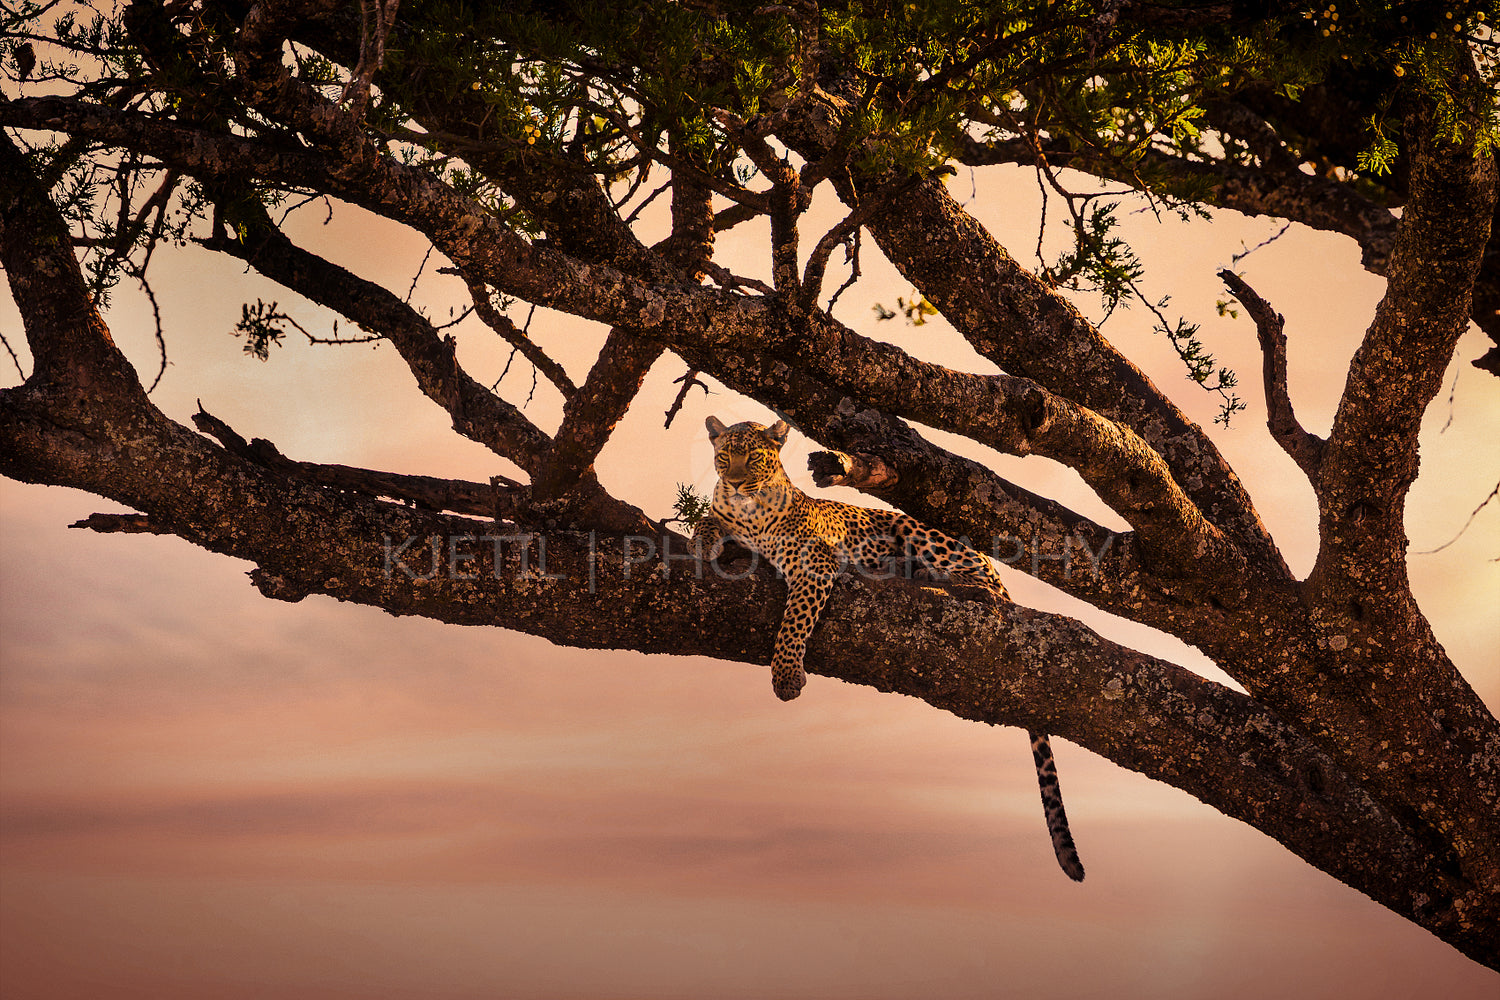 Leopard rests in a tree at sunset